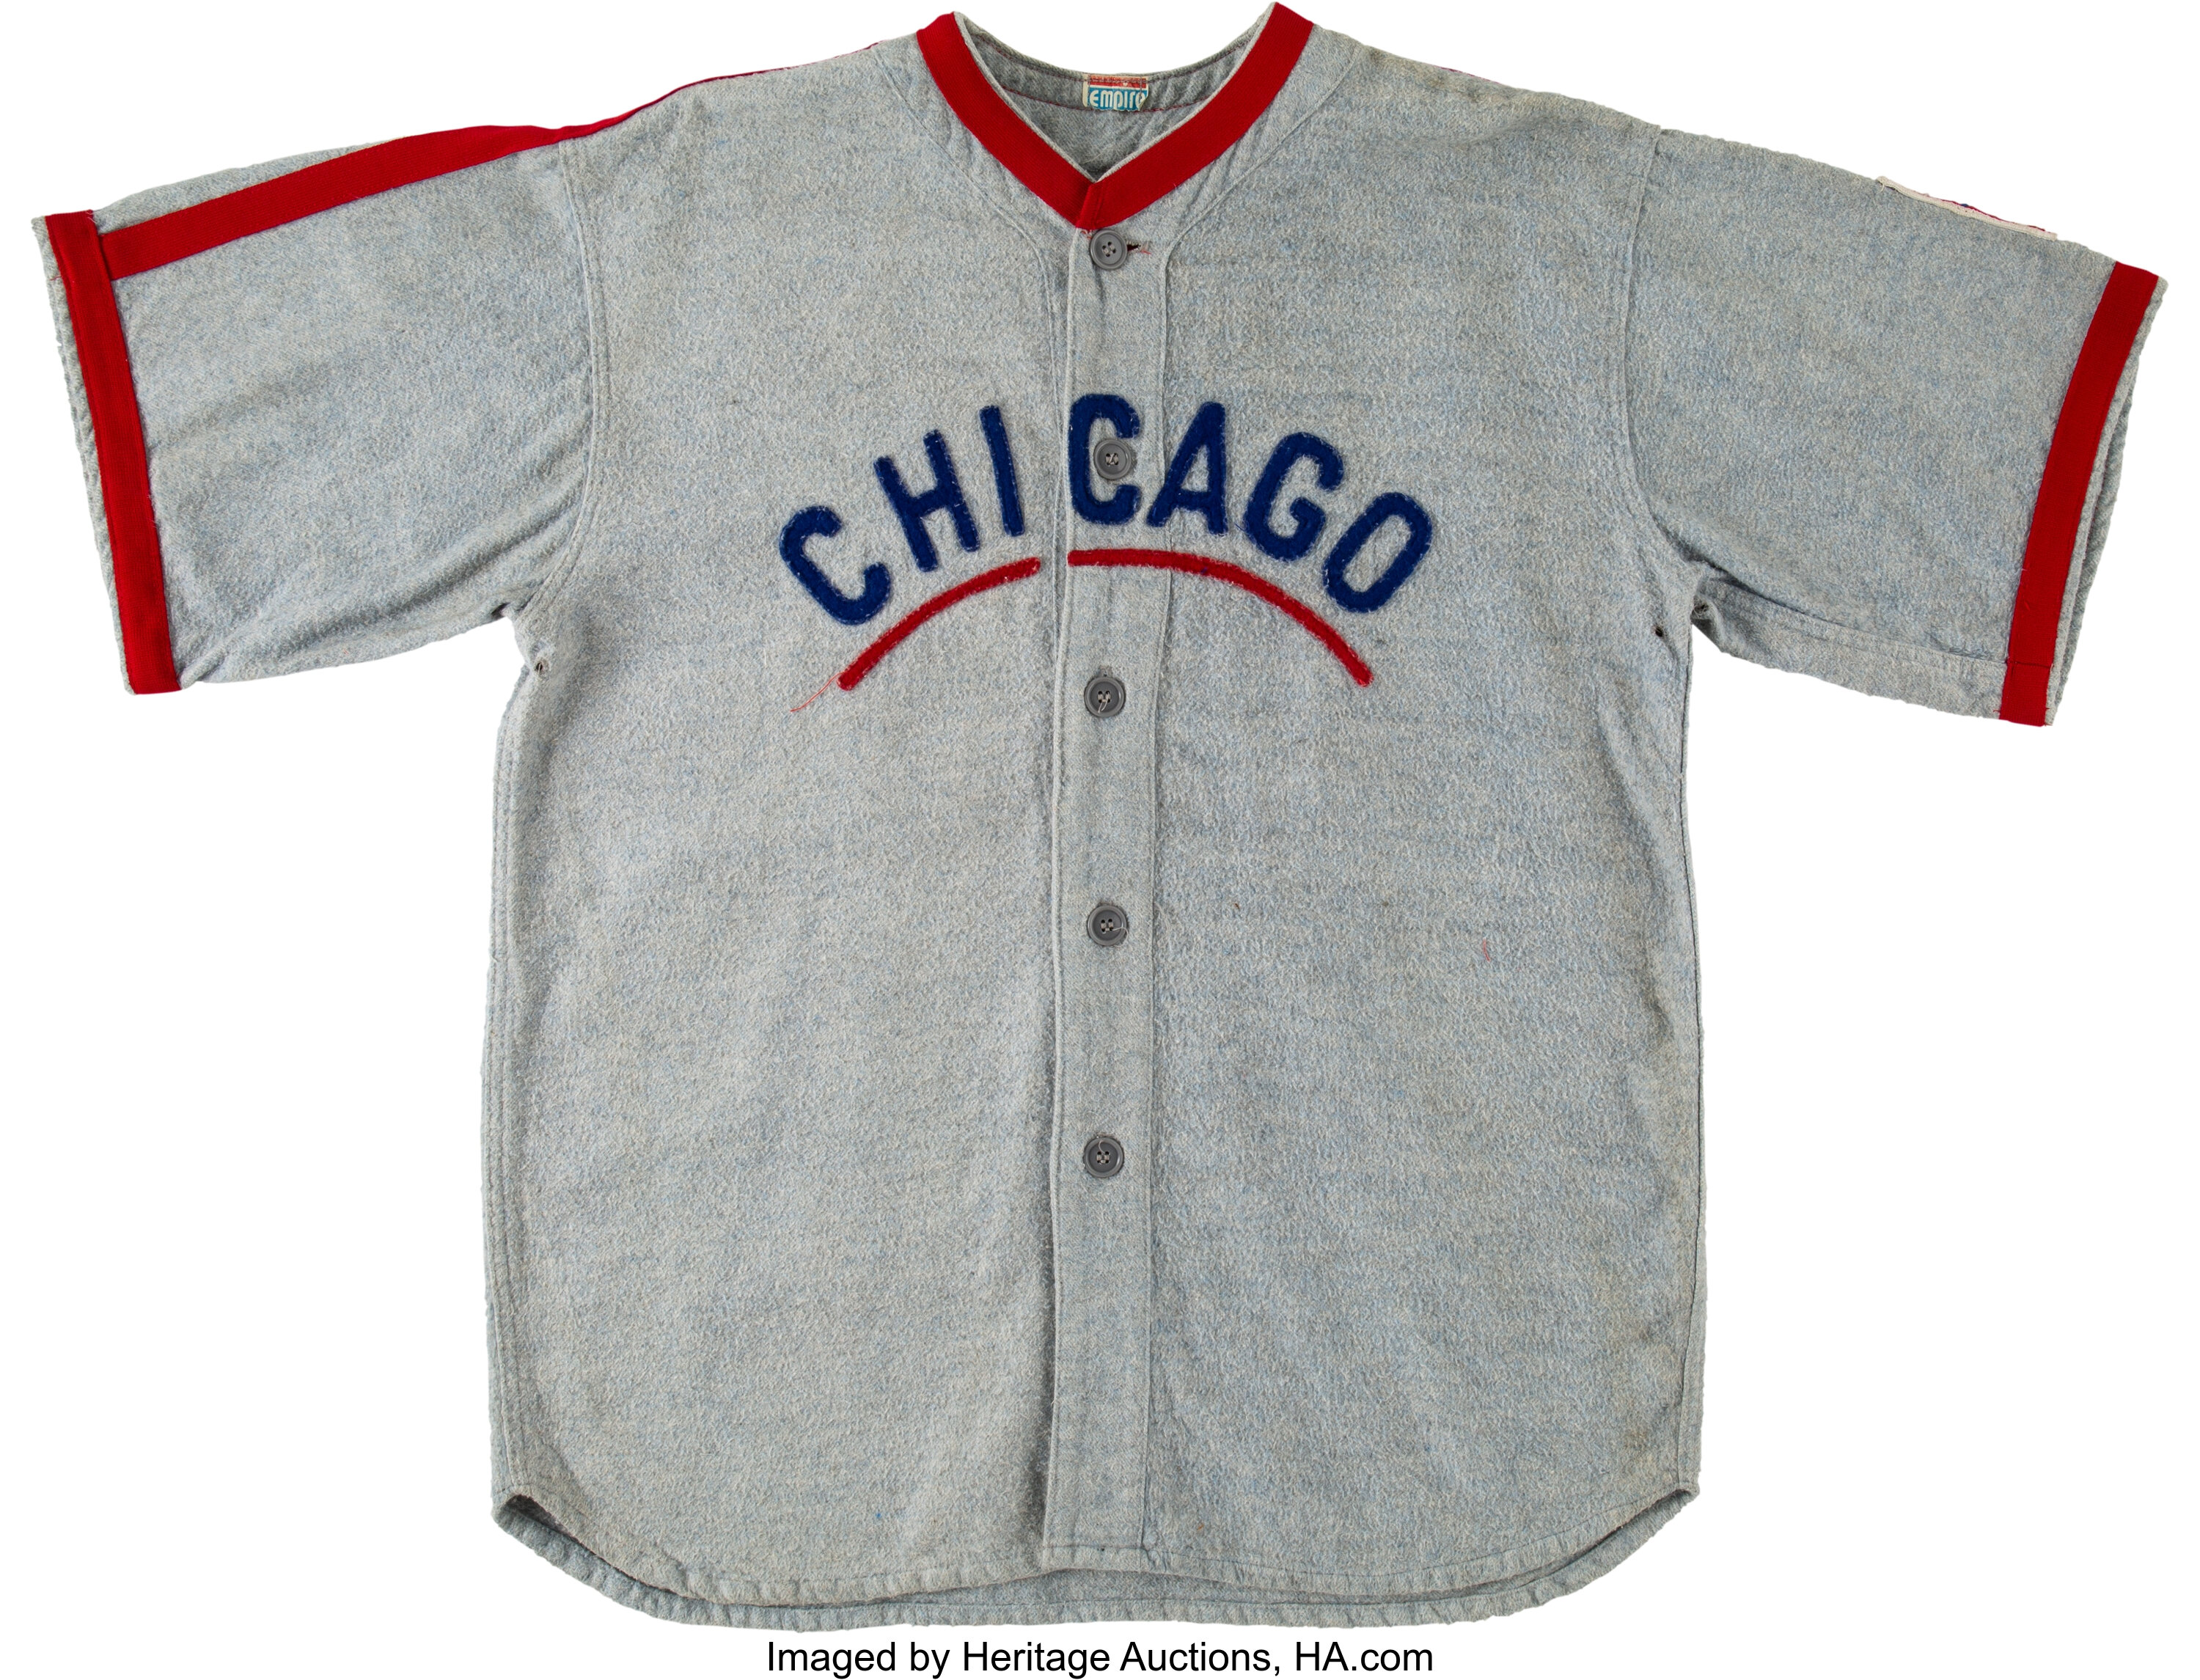 1984 Film Worn Chicago Cubs Jersey from The Natural. Baseball